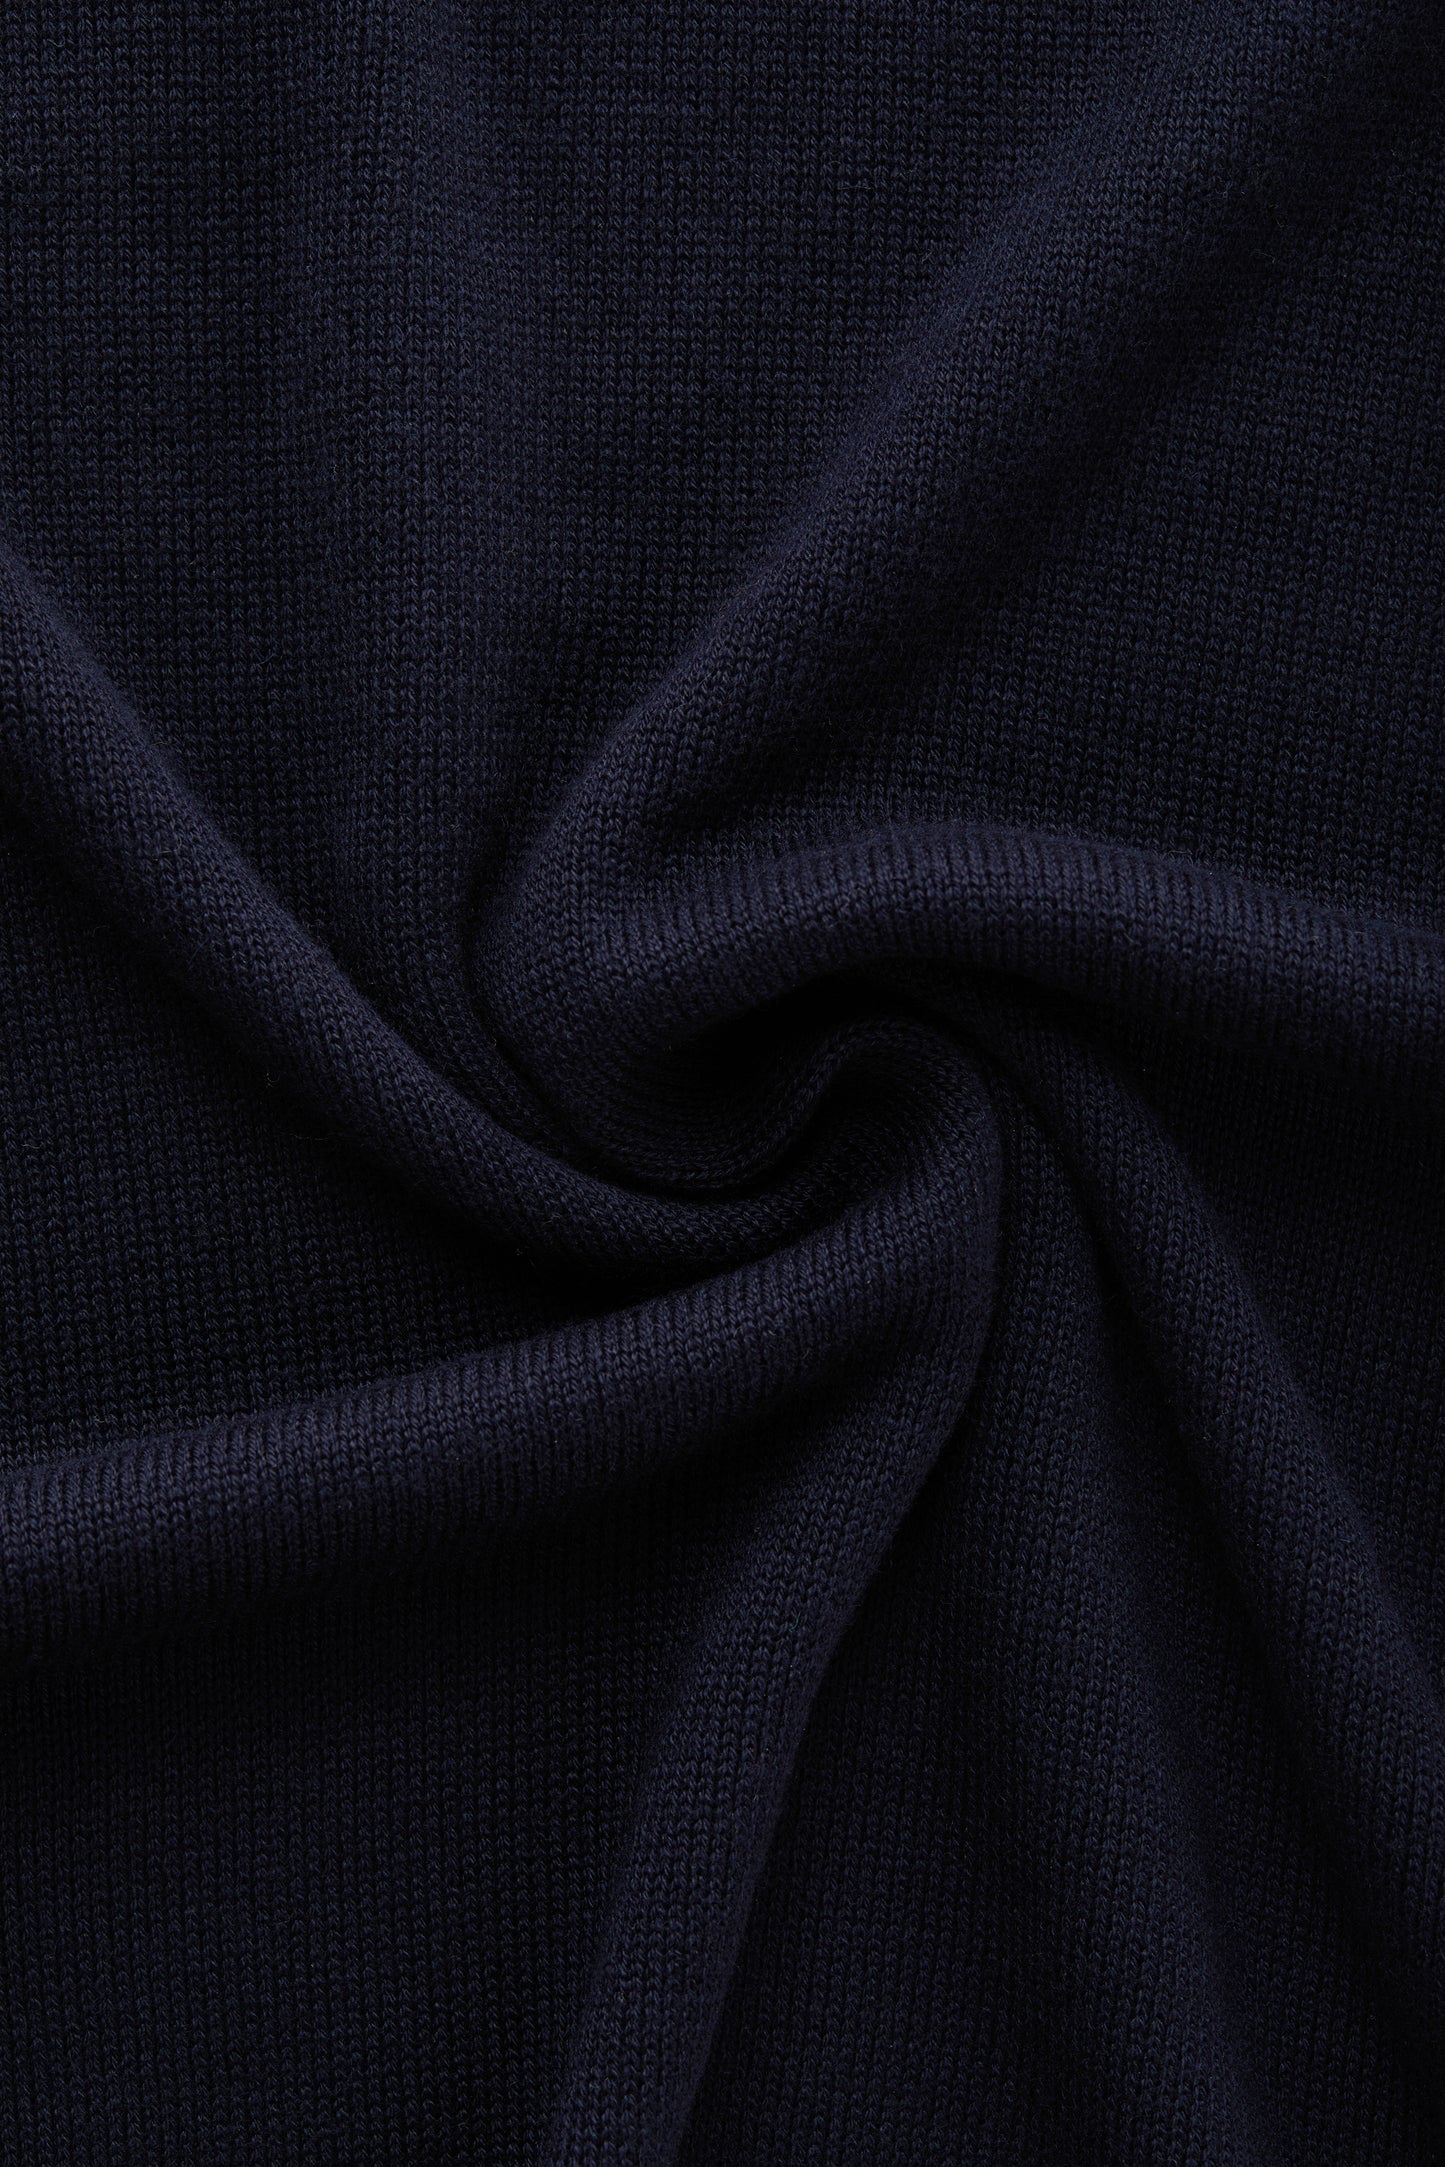 Long Sleeve Bamboo Cotton Cashmere Blend Knitted Polo Navy